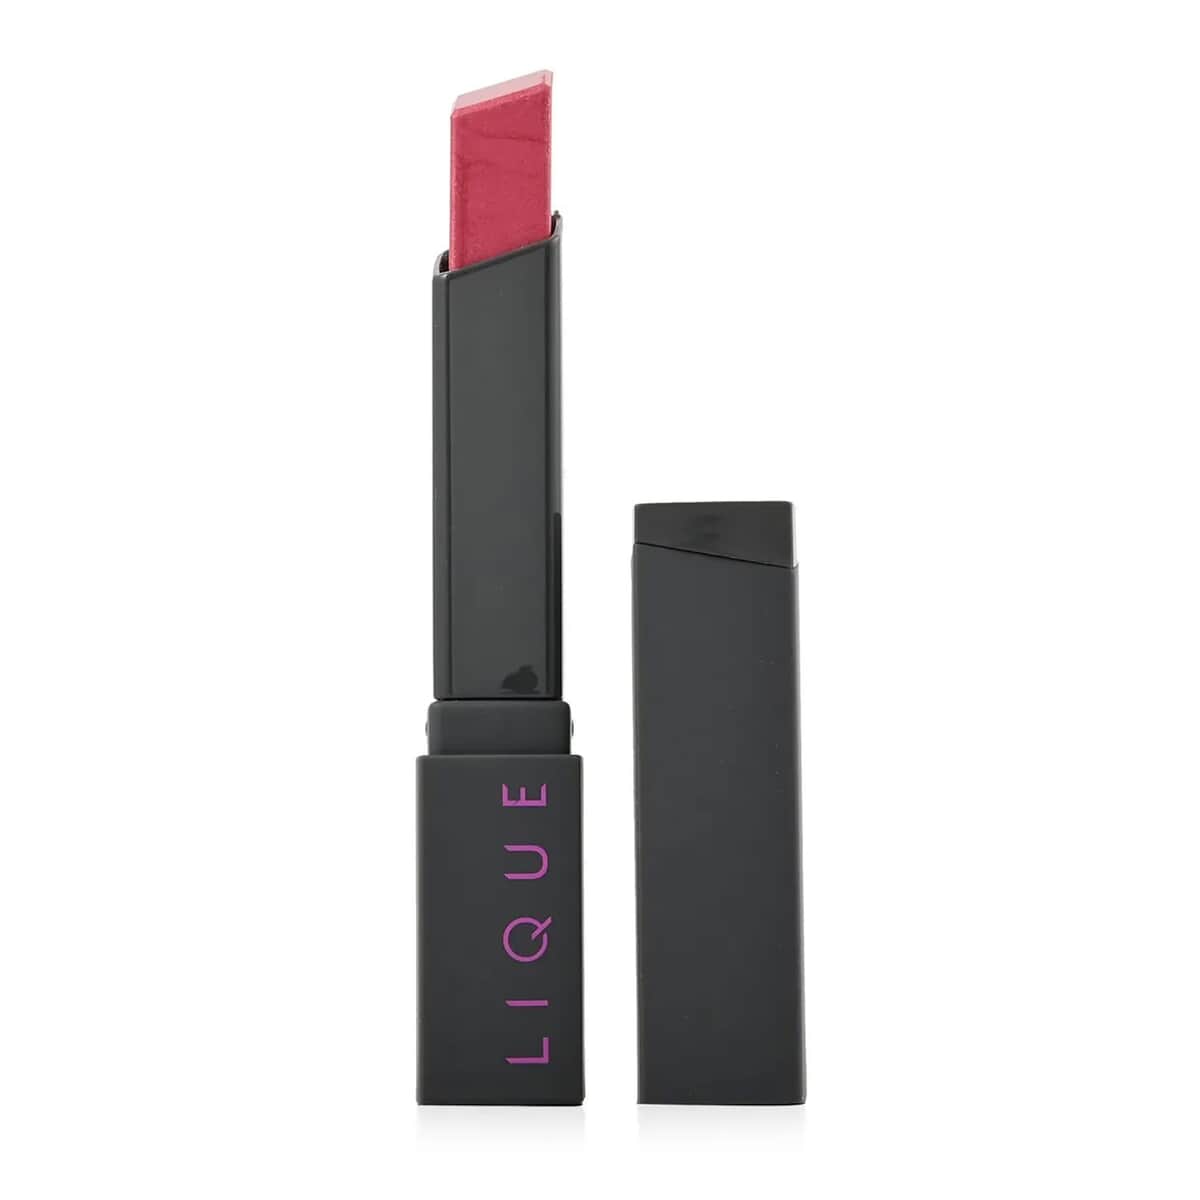 Closeout Lique Set of 2 (One Lipstick & One Effect Powder) with Free Set of 2 (One Lipstick & One Effect Powder) image number 5